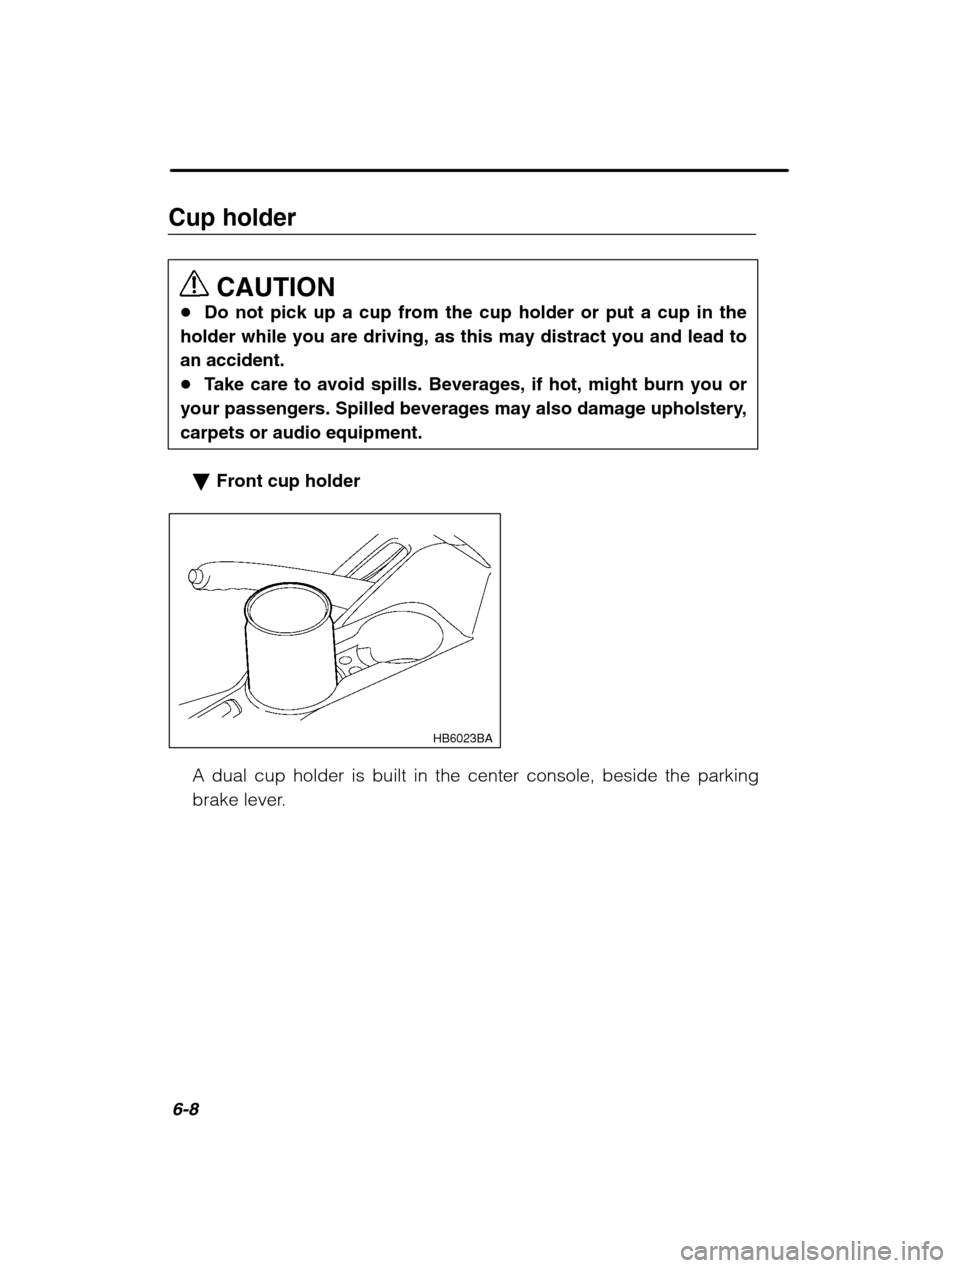 SUBARU LEGACY 2002 3.G Owners Manual 6-8
Cup holderCAUTION
� Do not pick up a cup from the cup holder or put a cup in the
holder while you are driving, as this may distract you and lead to an accident.� Take care to avoid spills. Beverag